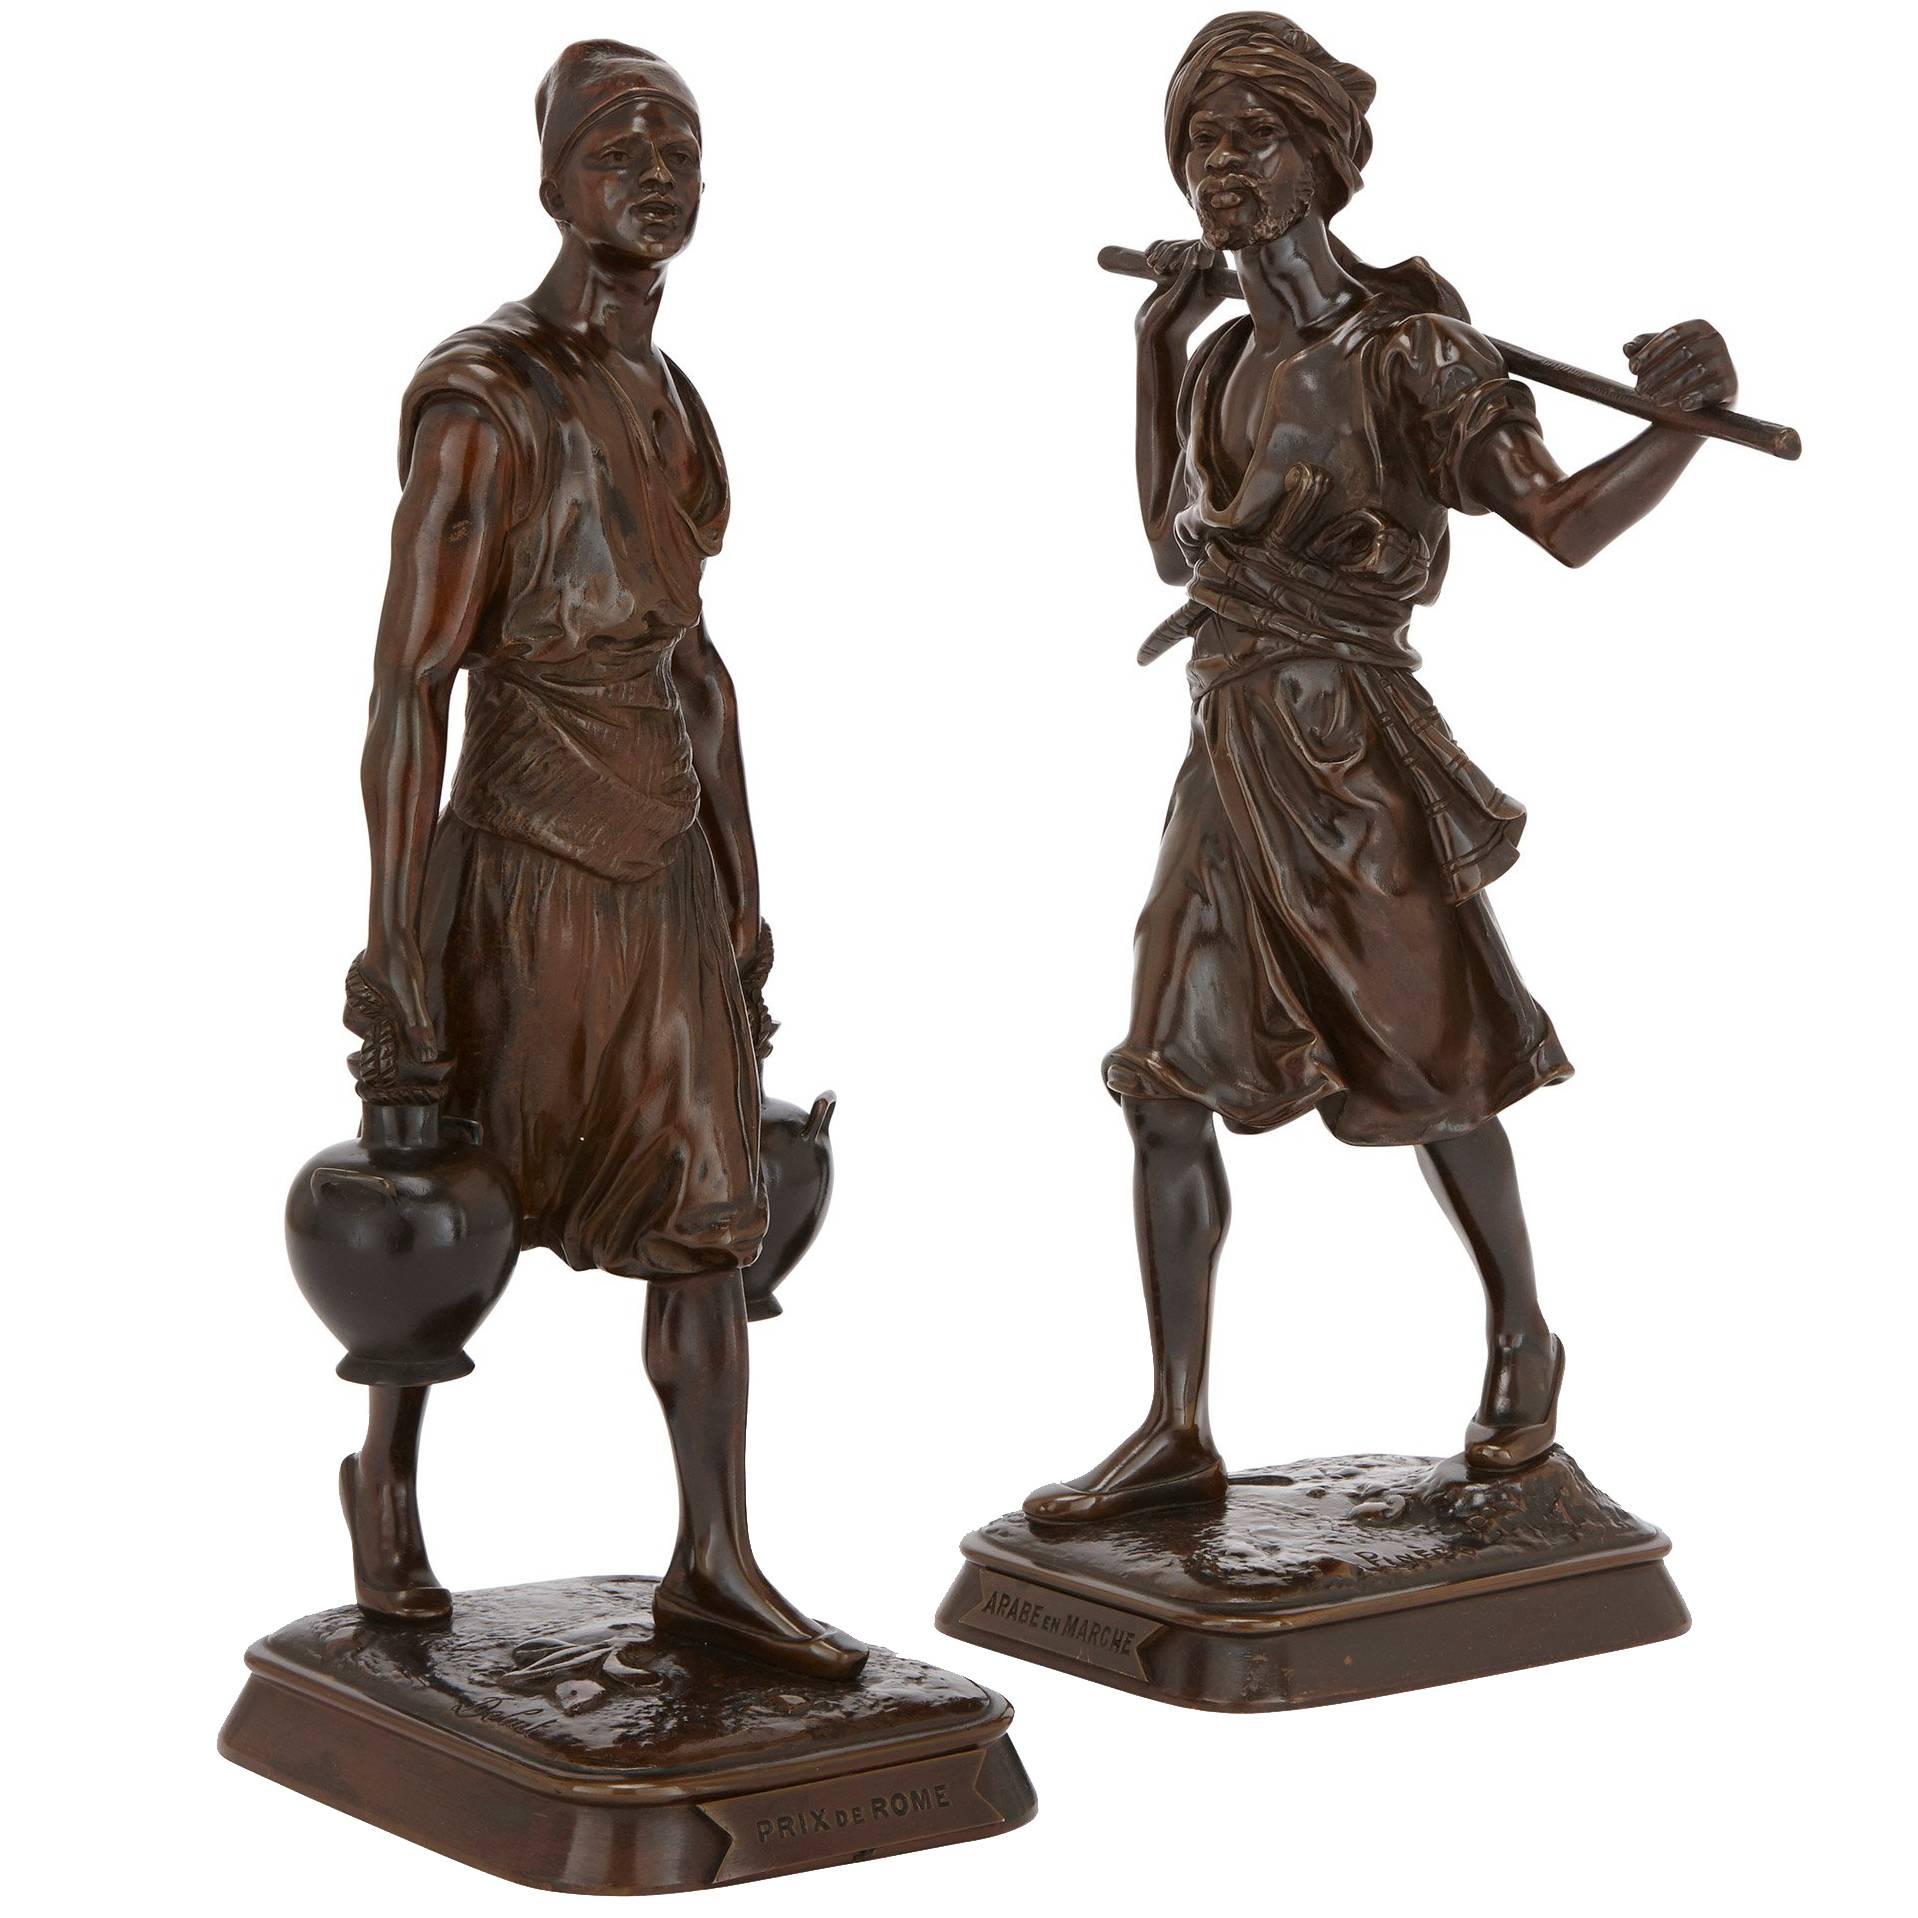 Pair of Orientalist Style Patinated Bronze Sculptures by Debut and Pinedo